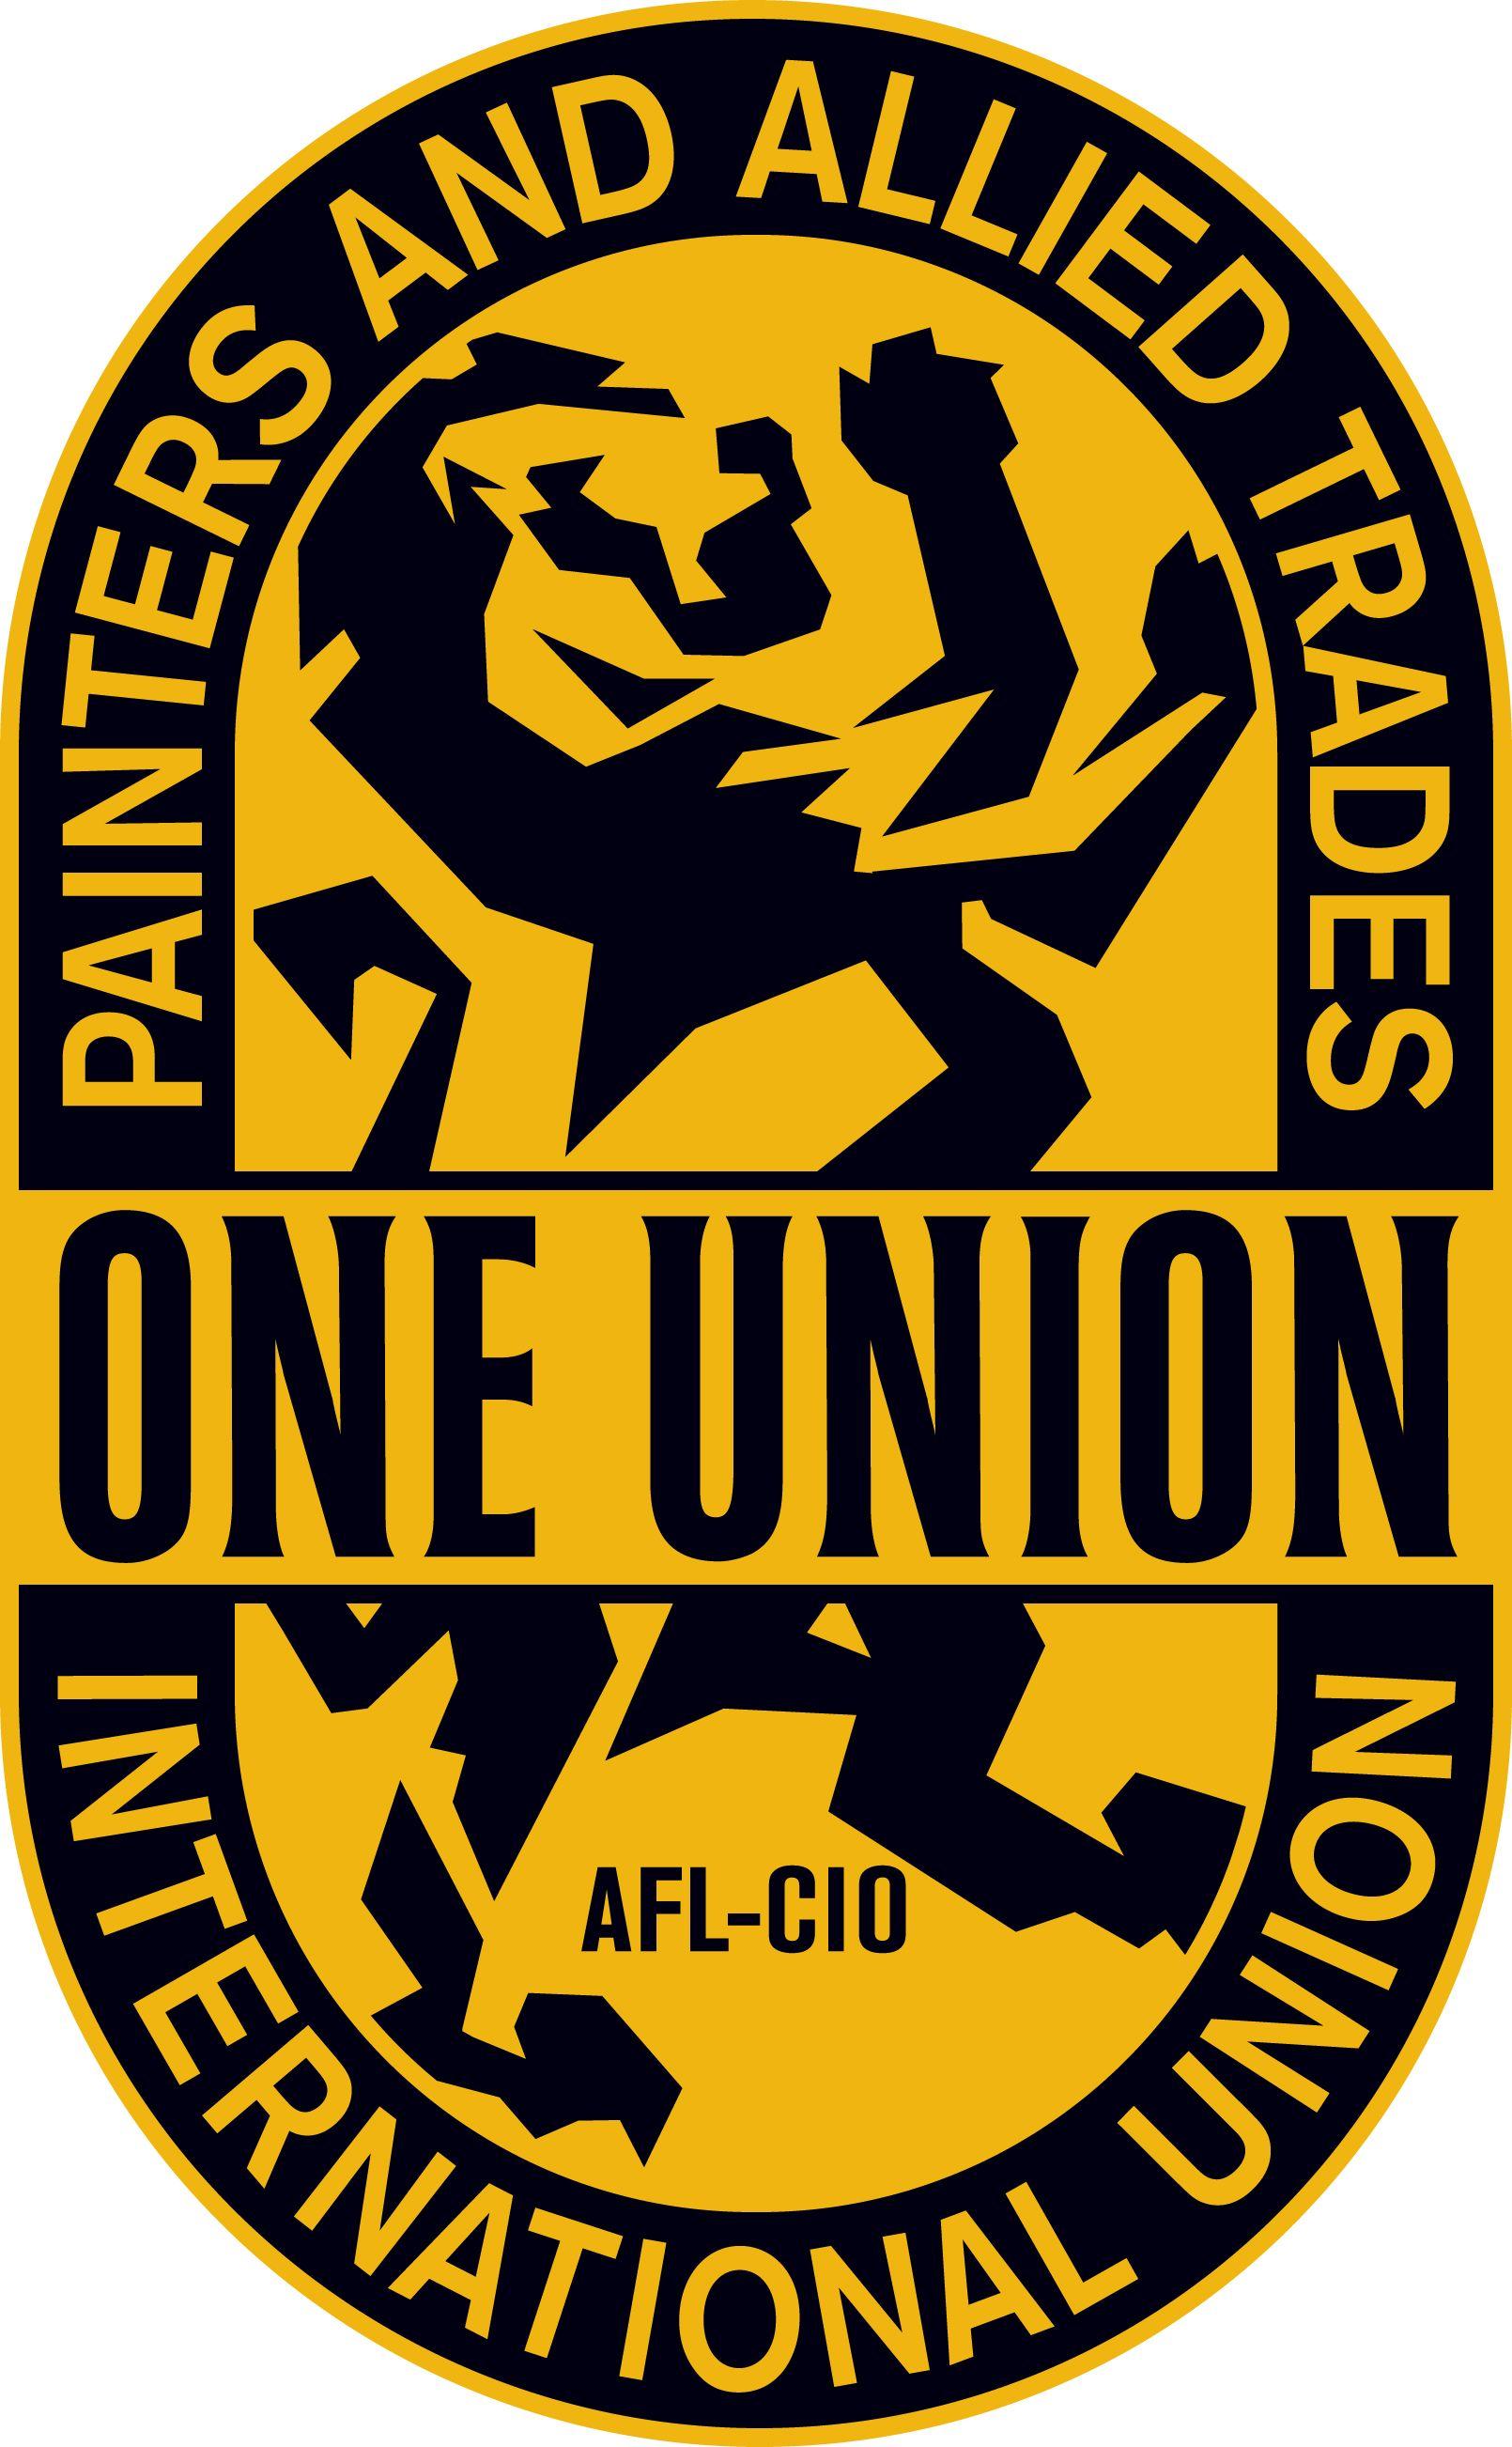 UAW Safety Logo - IUPAT International Union of Painters and Allied Trades